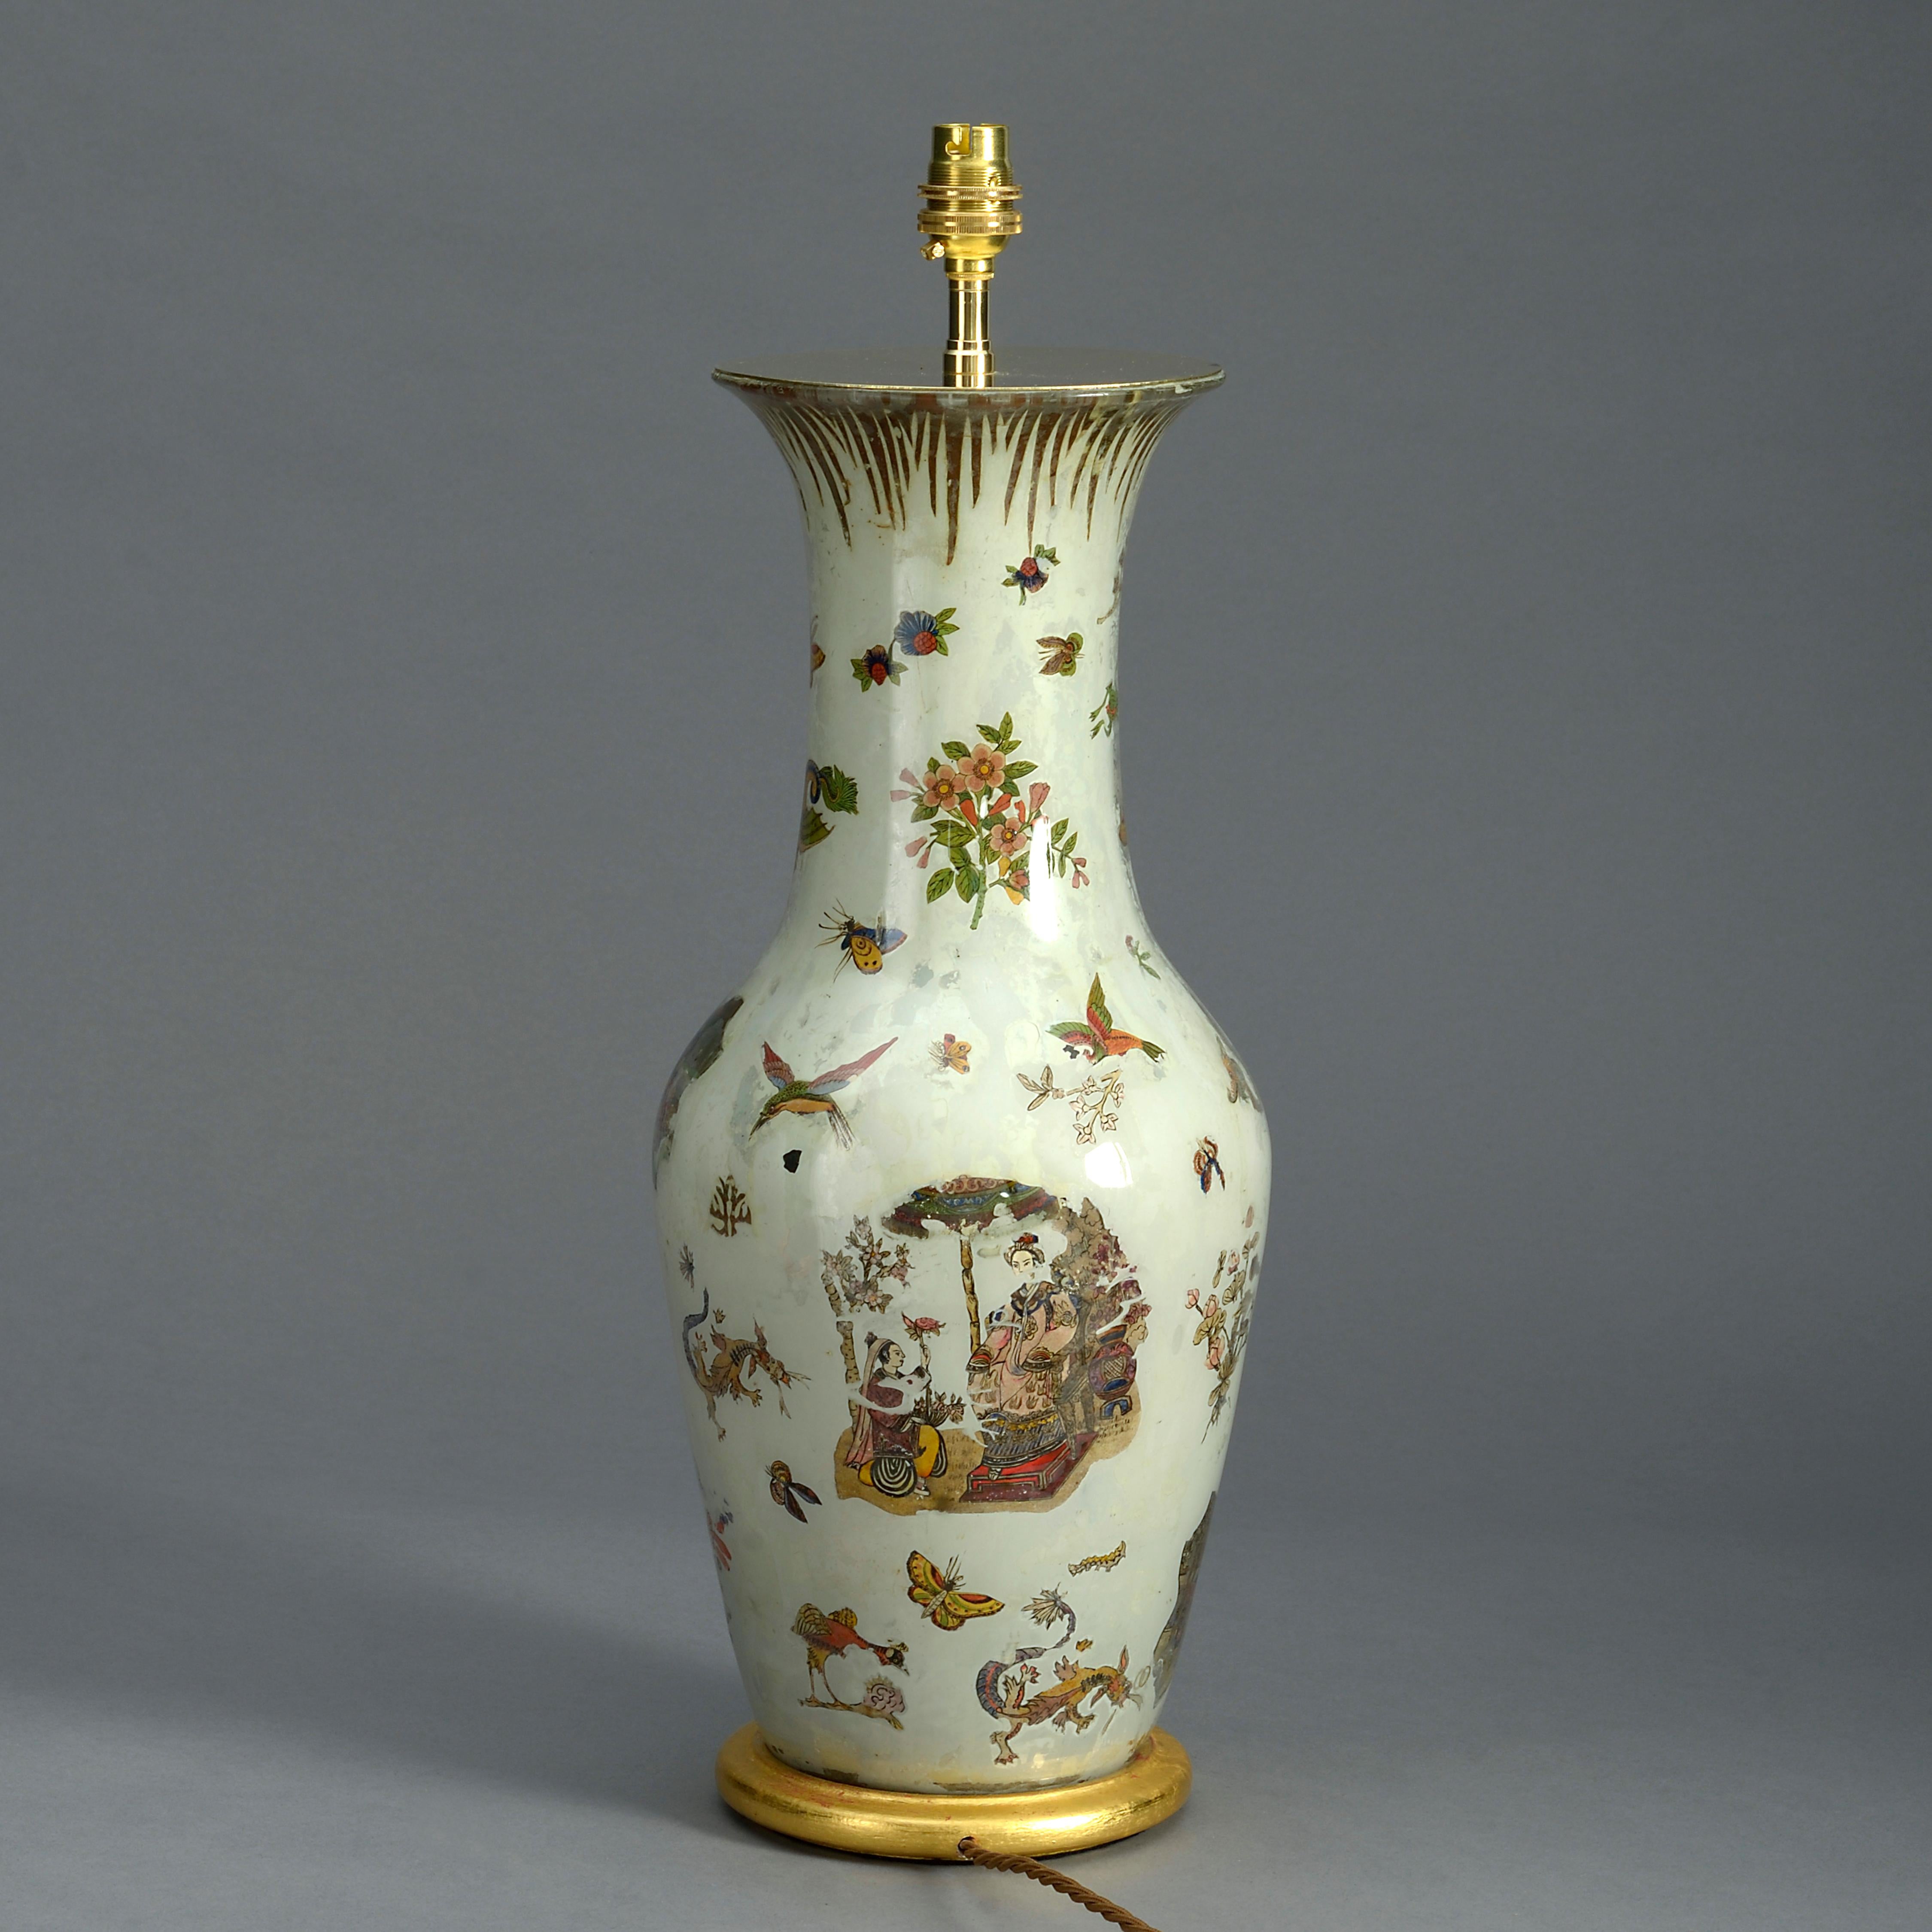 A mid-nineteenth century Decalcomania glass vase, of baluster form, the body decorated throughout with dragons, chinamen, flowers, birds, insects, and other chinoiseries on an ivory ground, all raised on a turned giltwood base and mounted as a